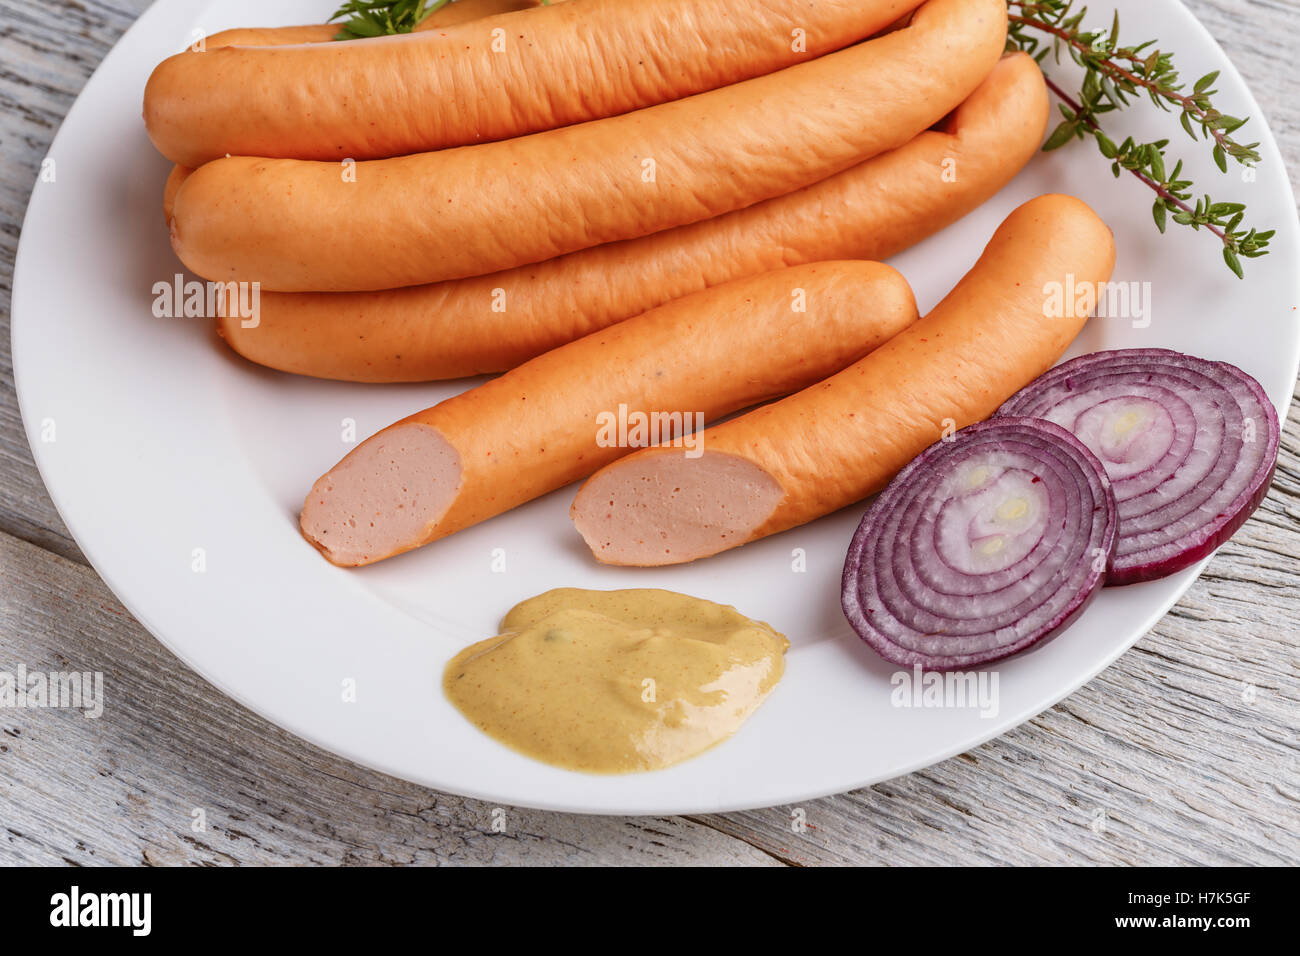 Hot Dog sausages on white plate Stock Photo